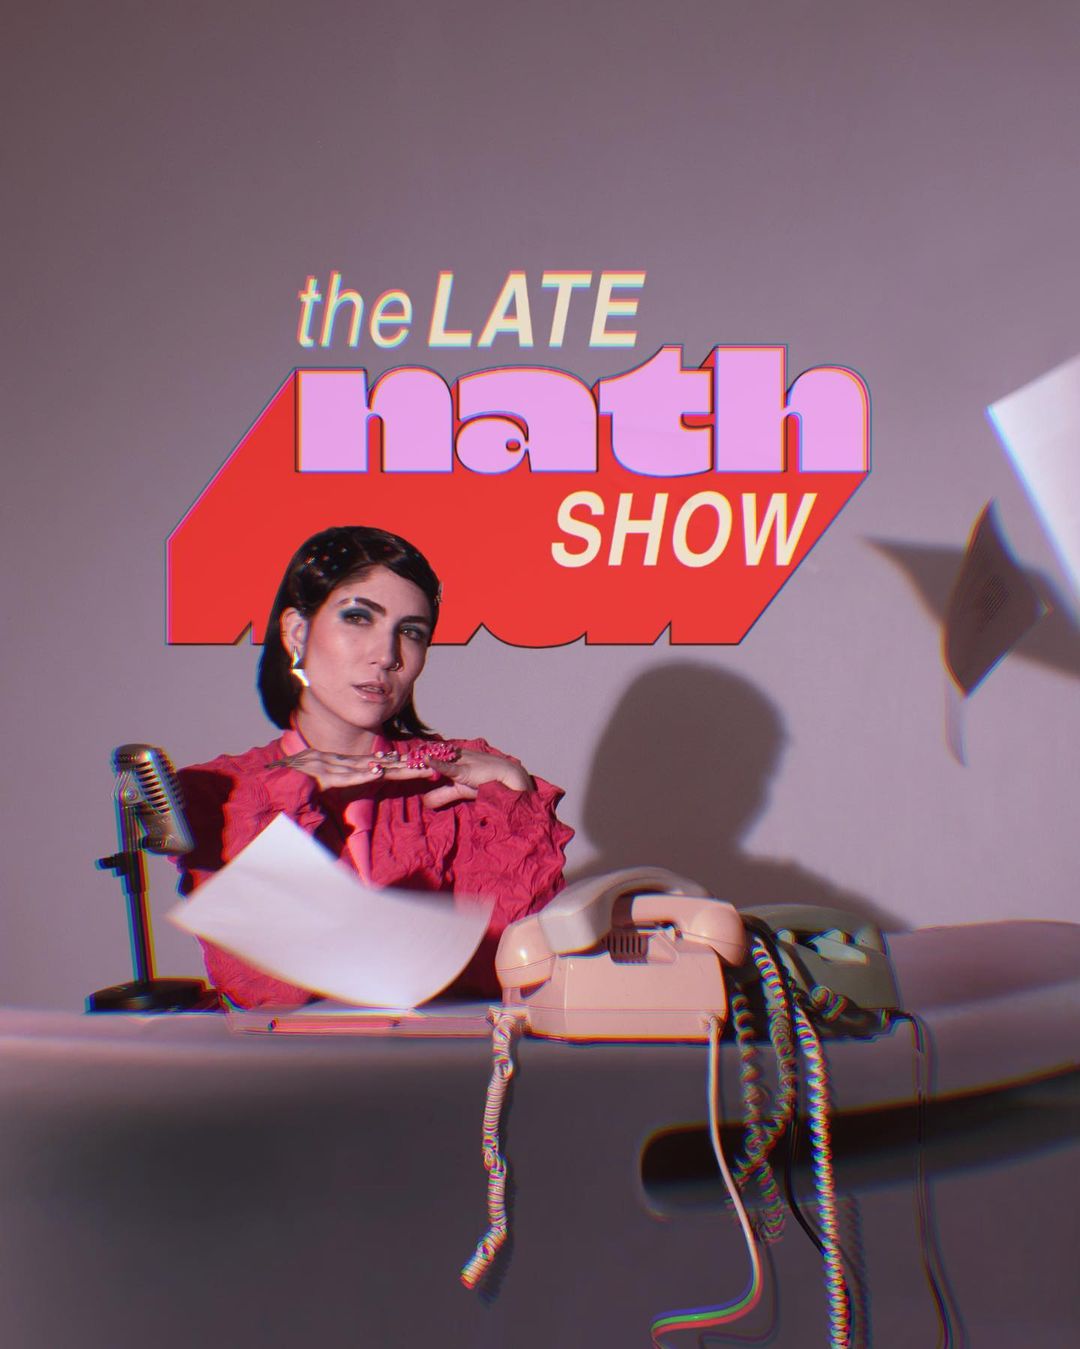 the late nath show